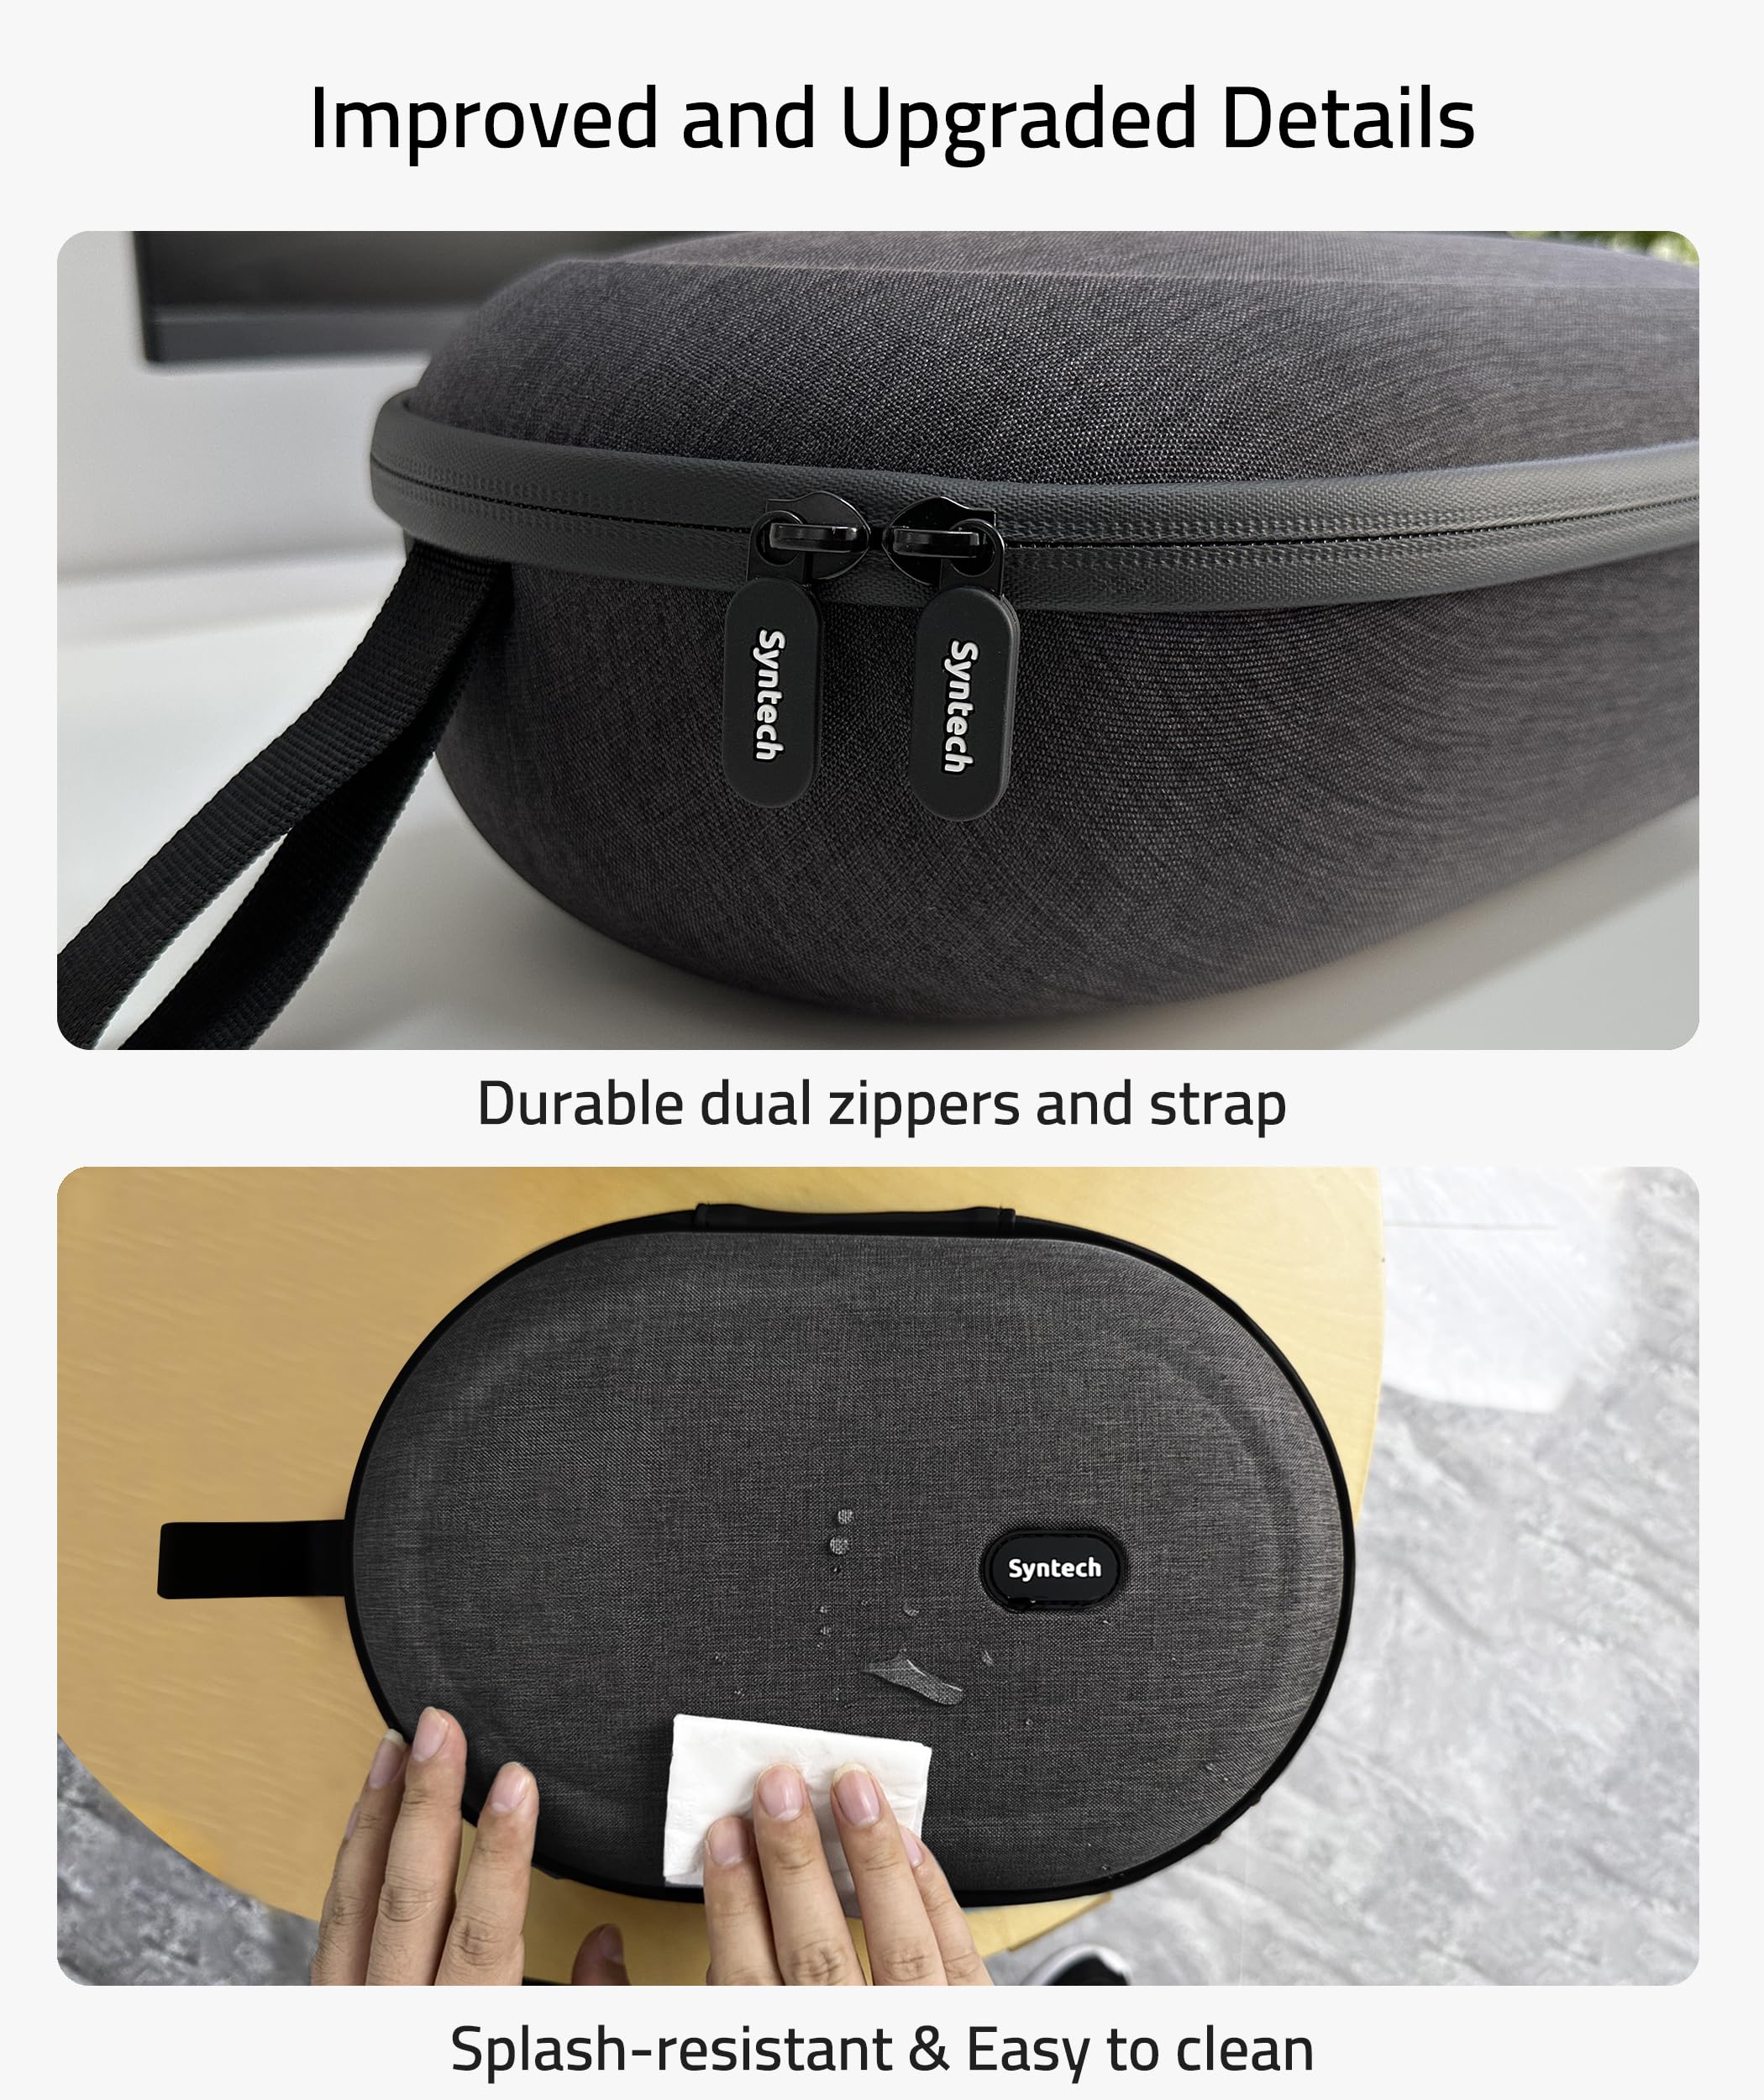 vr gaming headset case